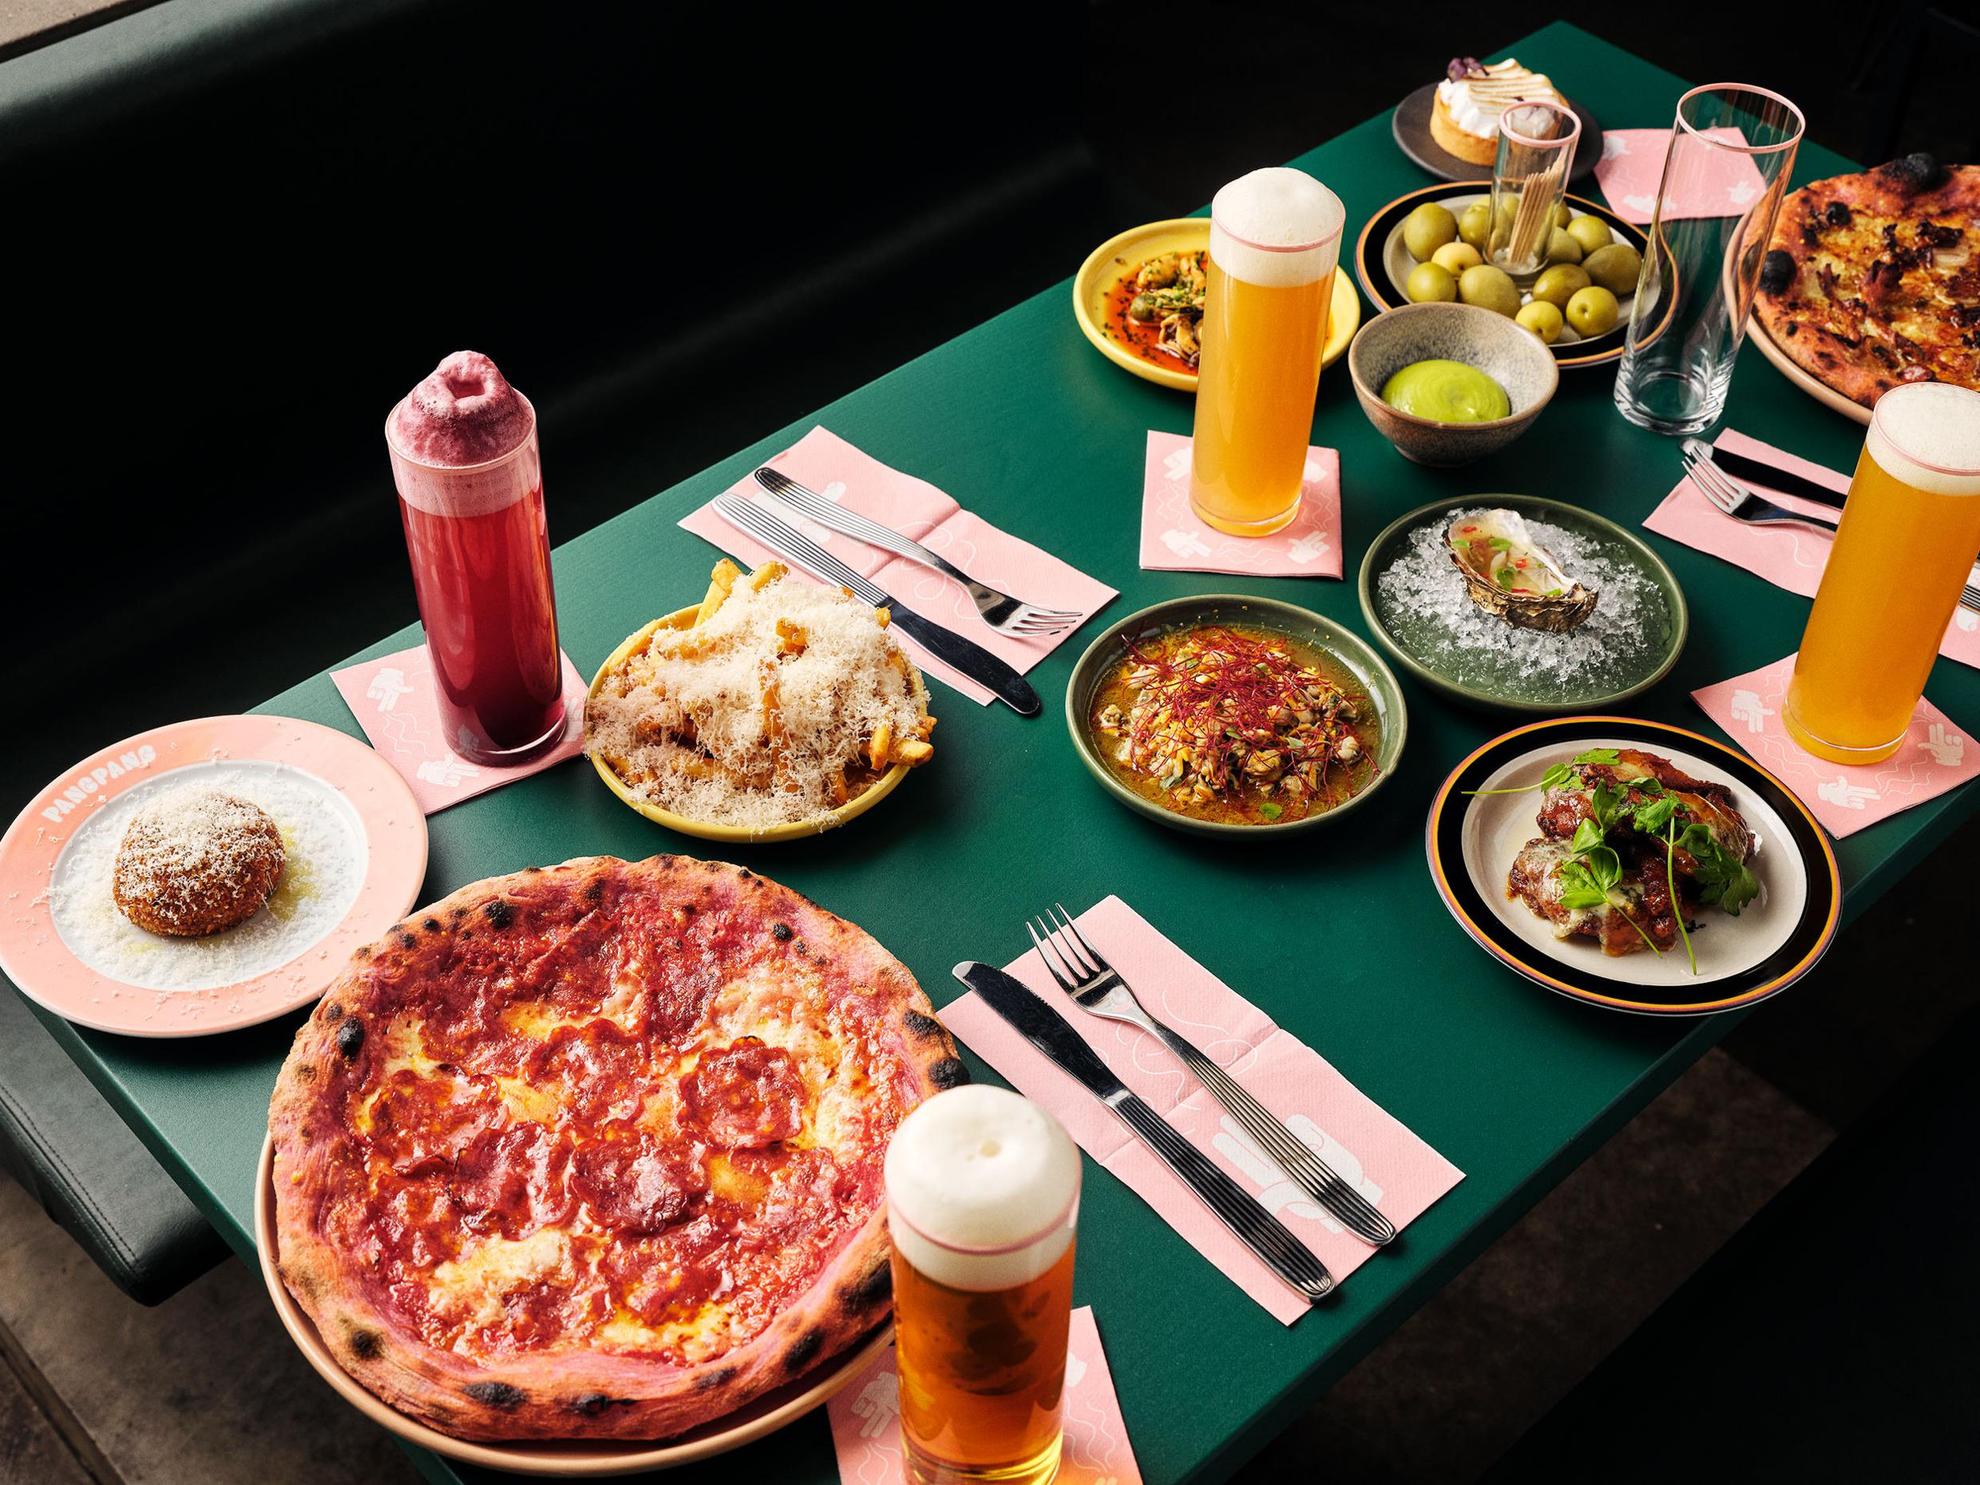 A green table with cutlery, glasses filled with beer and plates with food such as pizza, french fries, oysters and olives.